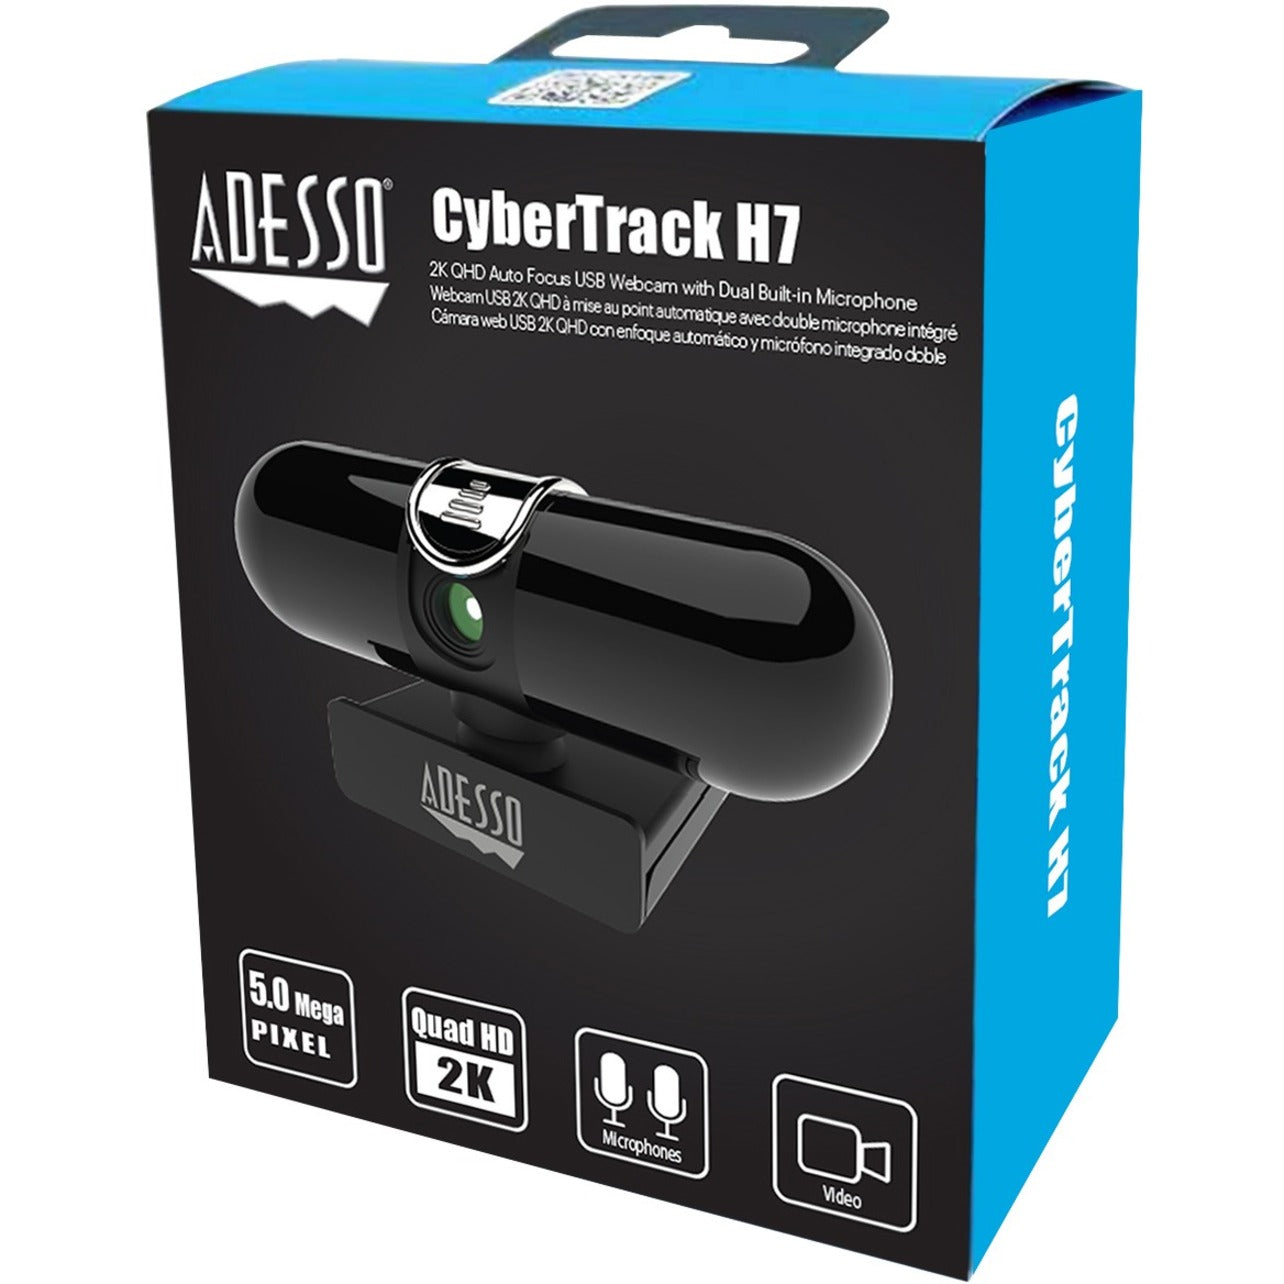 Adesso CYBERTRACK H7 2K QUAD HD Webcam with Autofocus, Built-in Mic & Privacy Cover